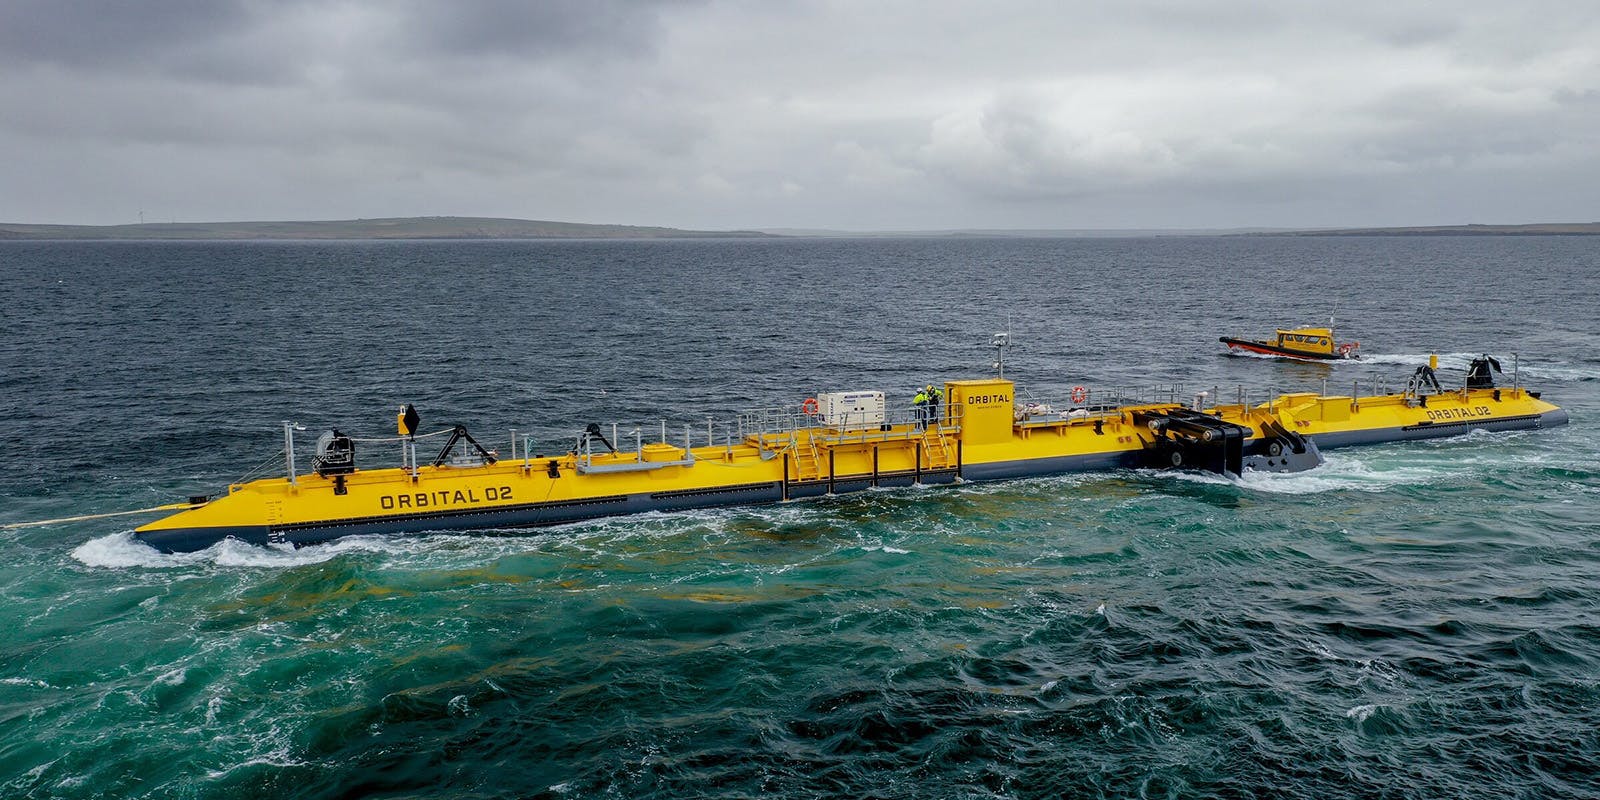 The world’s largest tidal turbine, the Orbital O2, in Orkney, Scotland